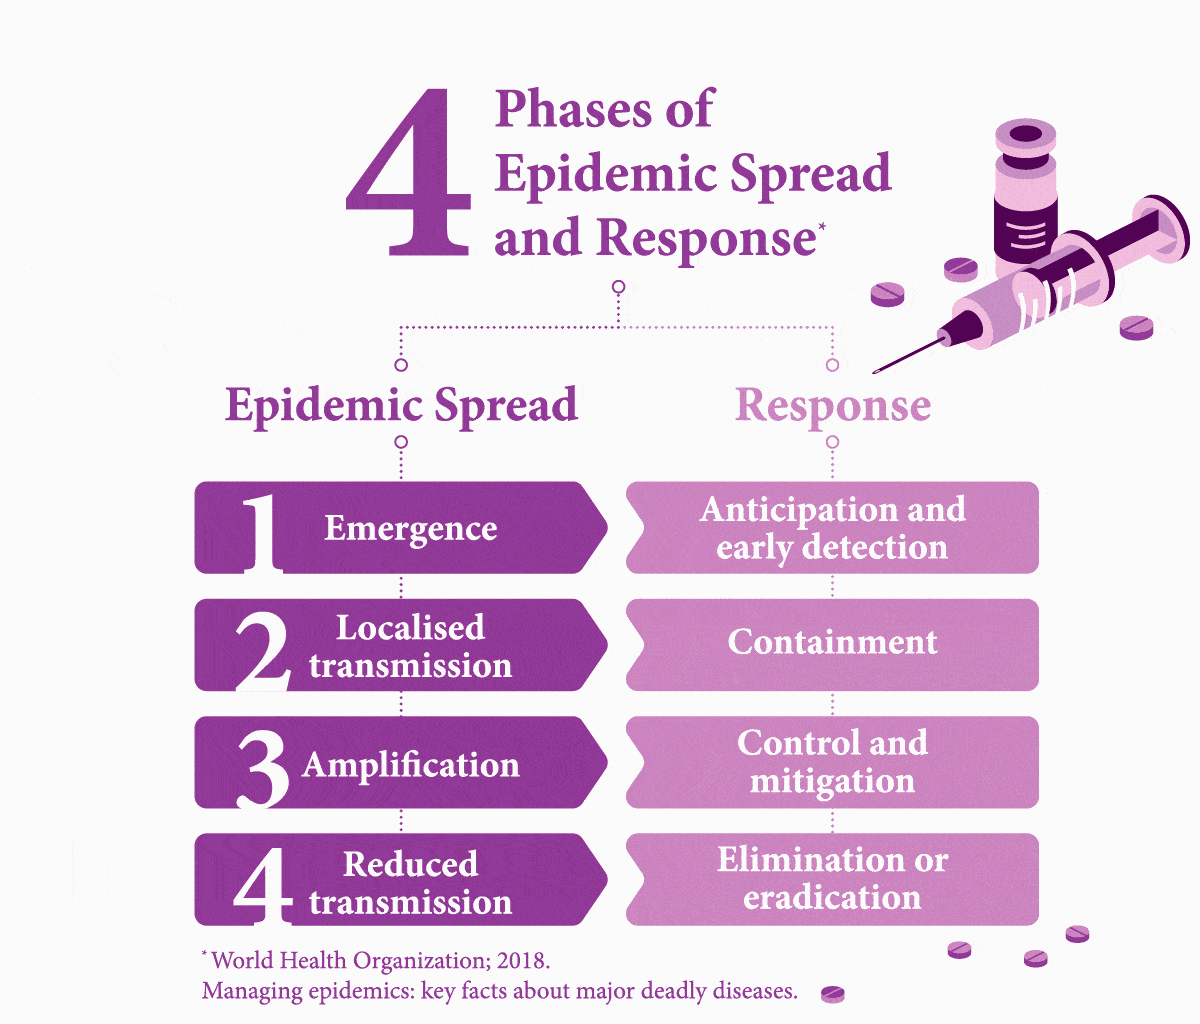 phases of epidemic spread and response